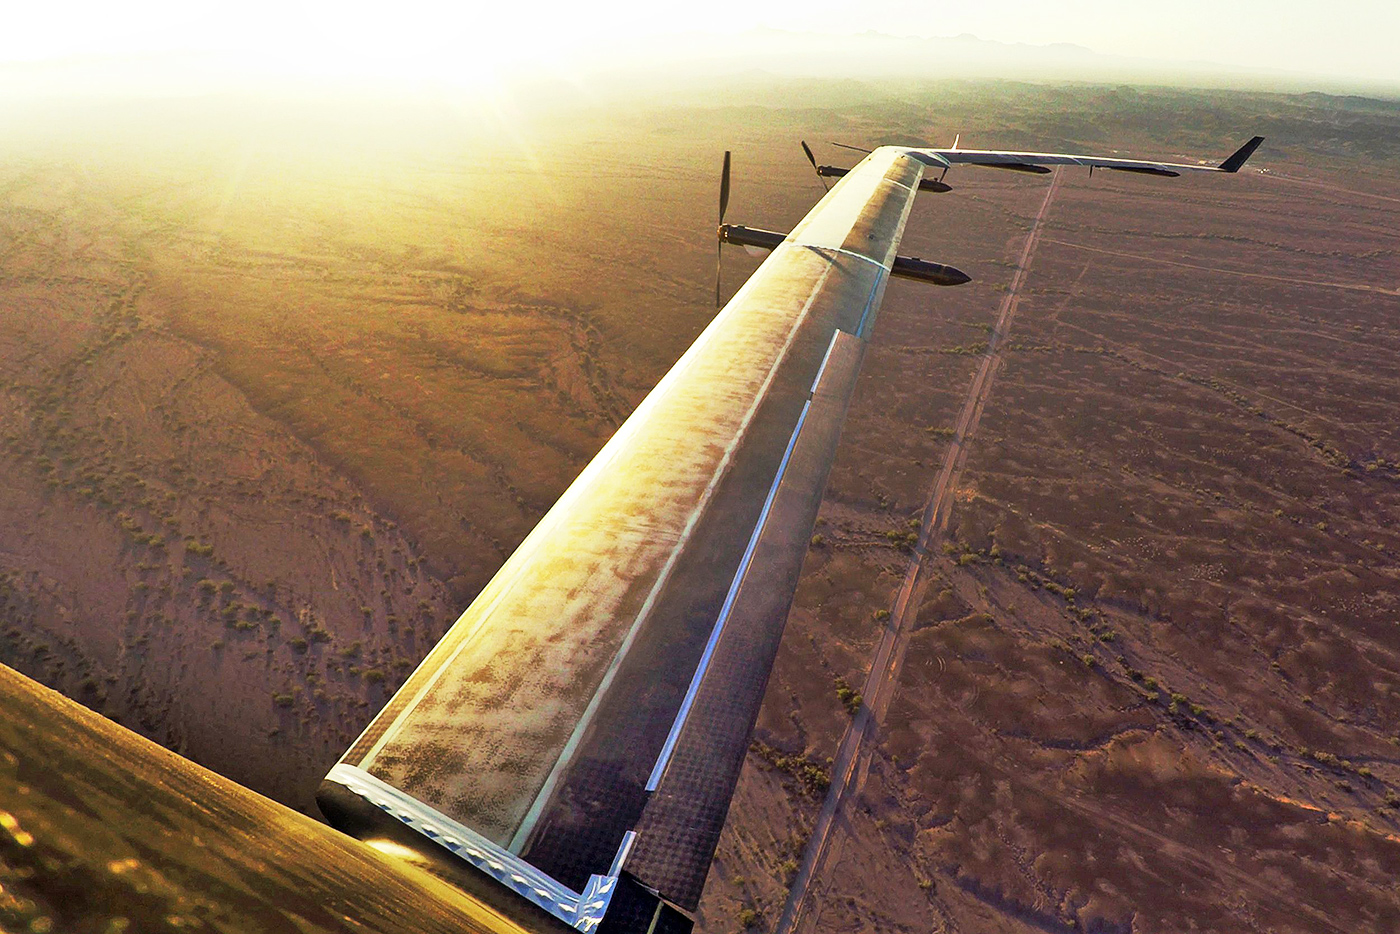 3-Facebook-Aquila-Drone Six new technologies that will enable faster, better internet to the world